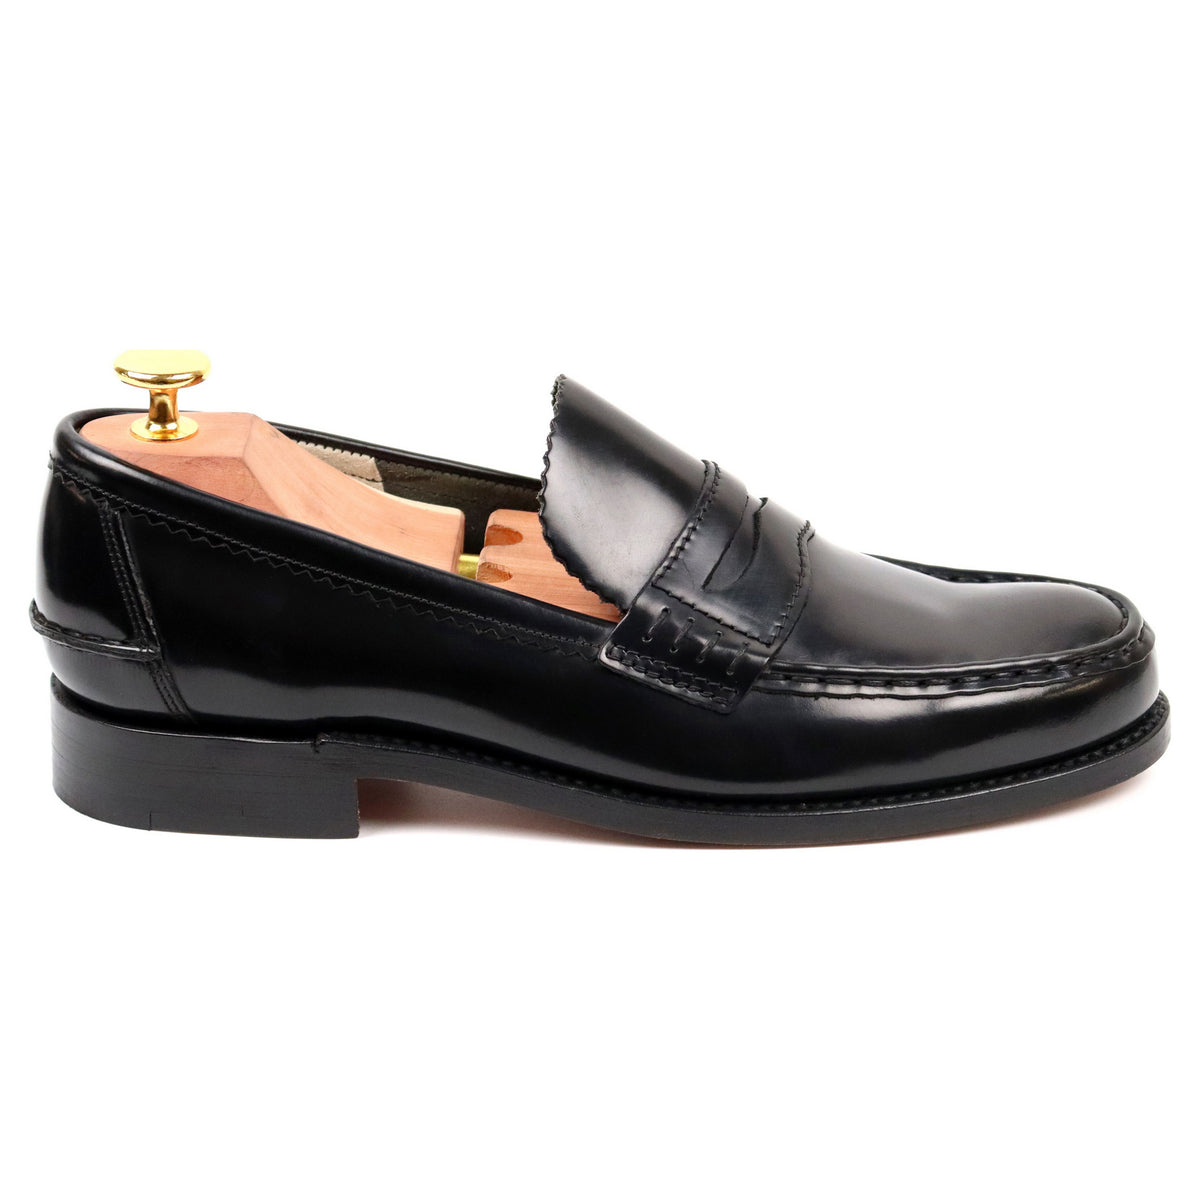 Black Leather Loafers UK 5.5 G